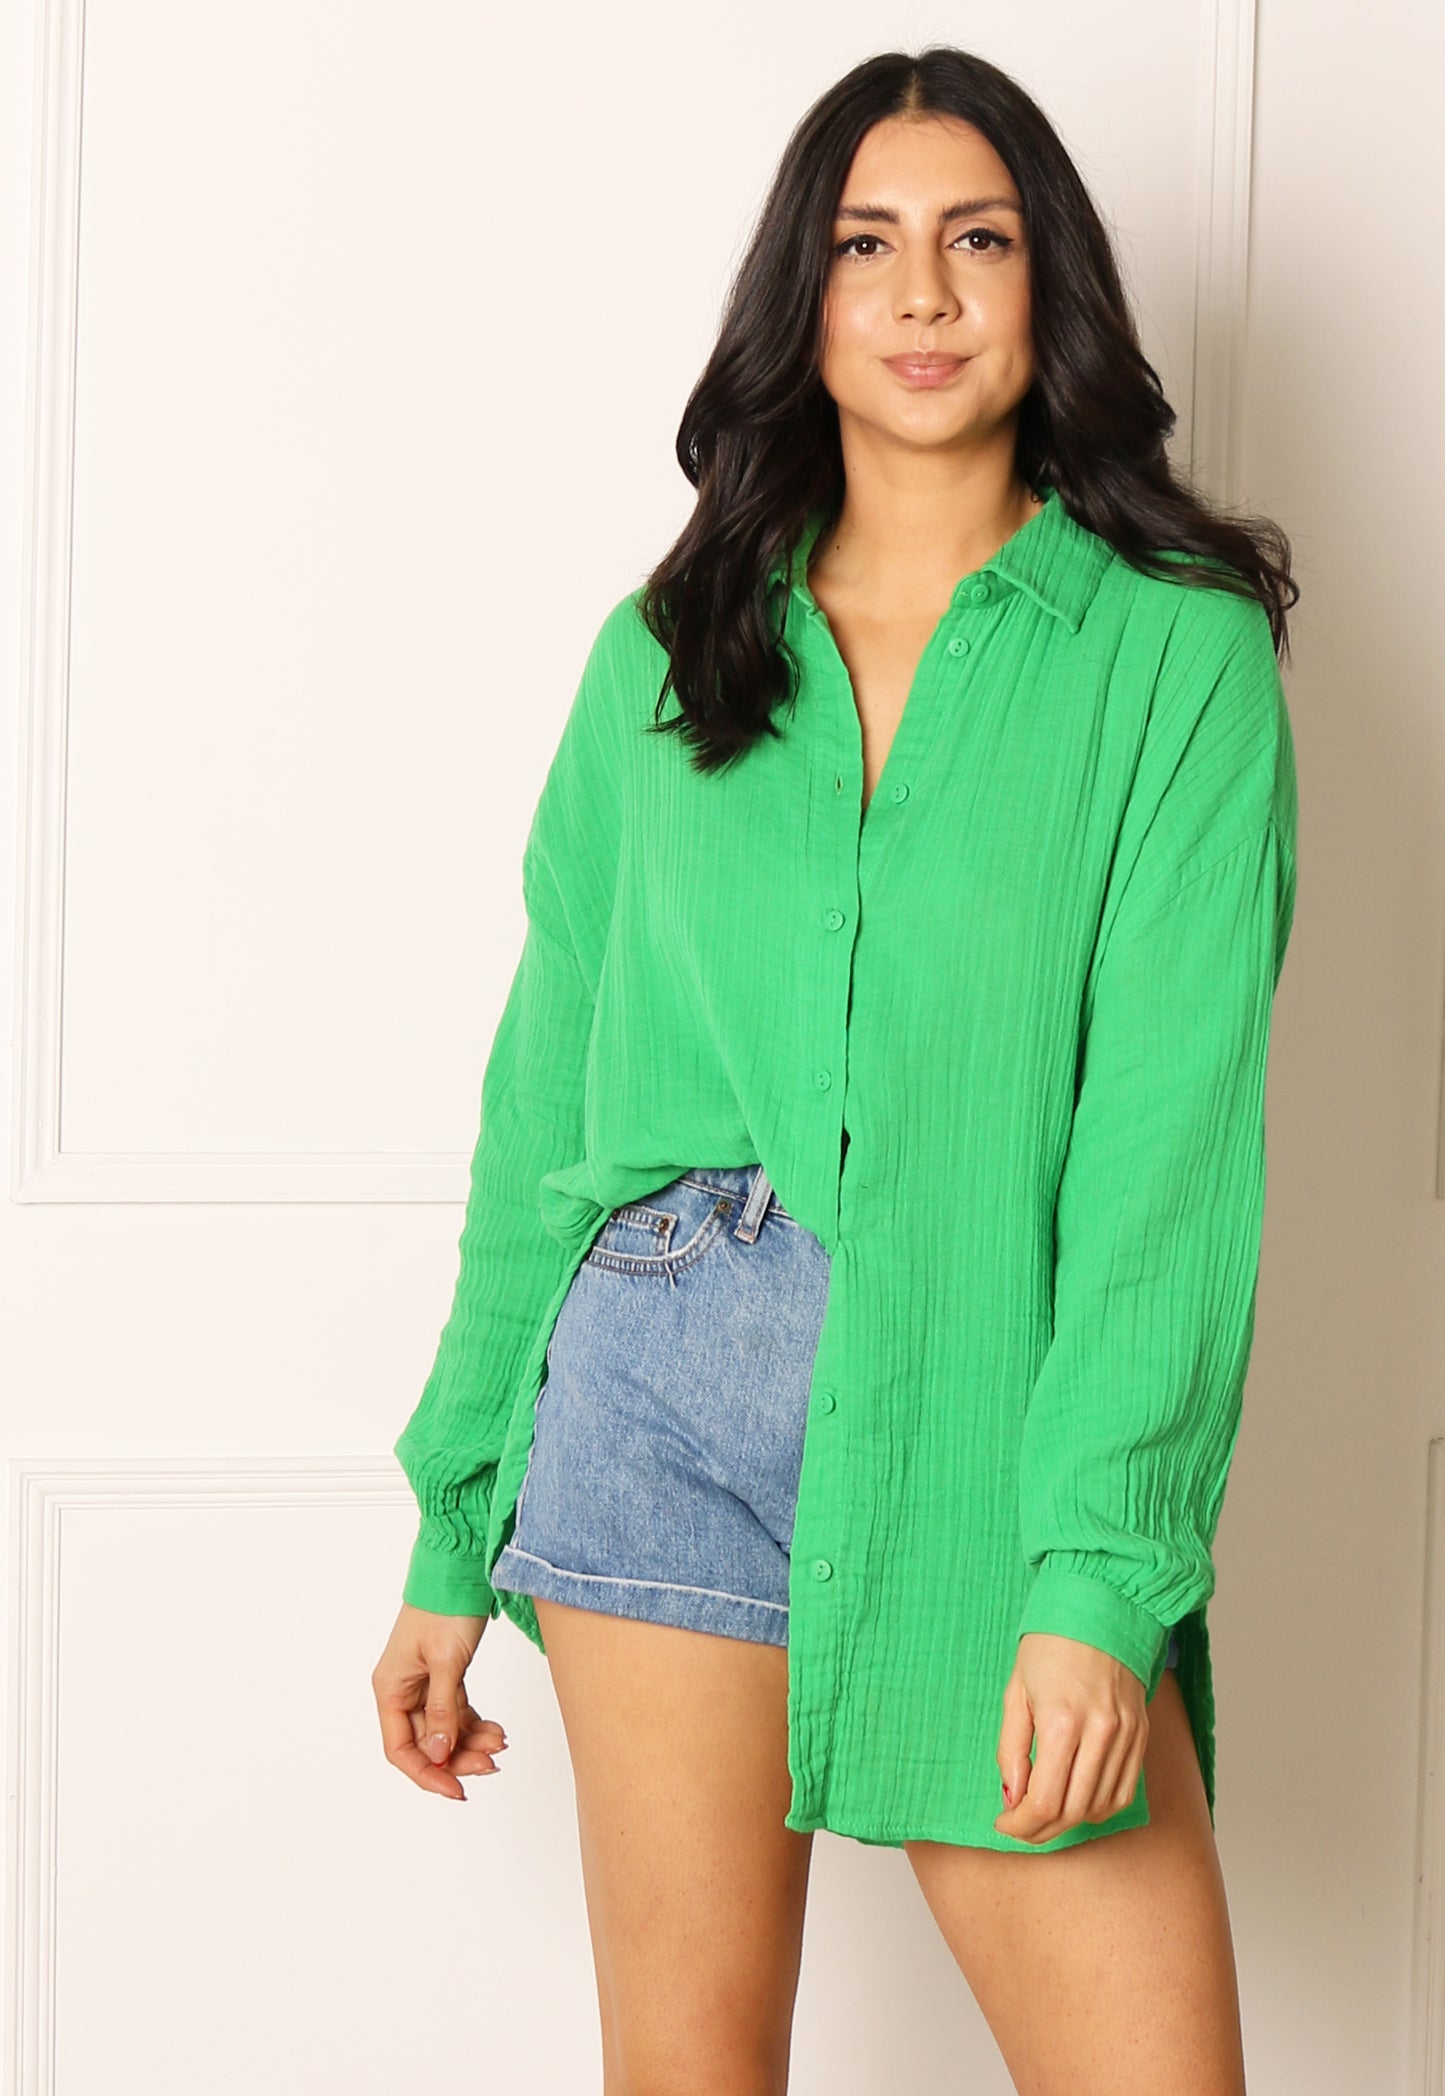 ONLY Thyra Oversized Cotton Cheesecloth Beach Shirt in Green - concretebartops